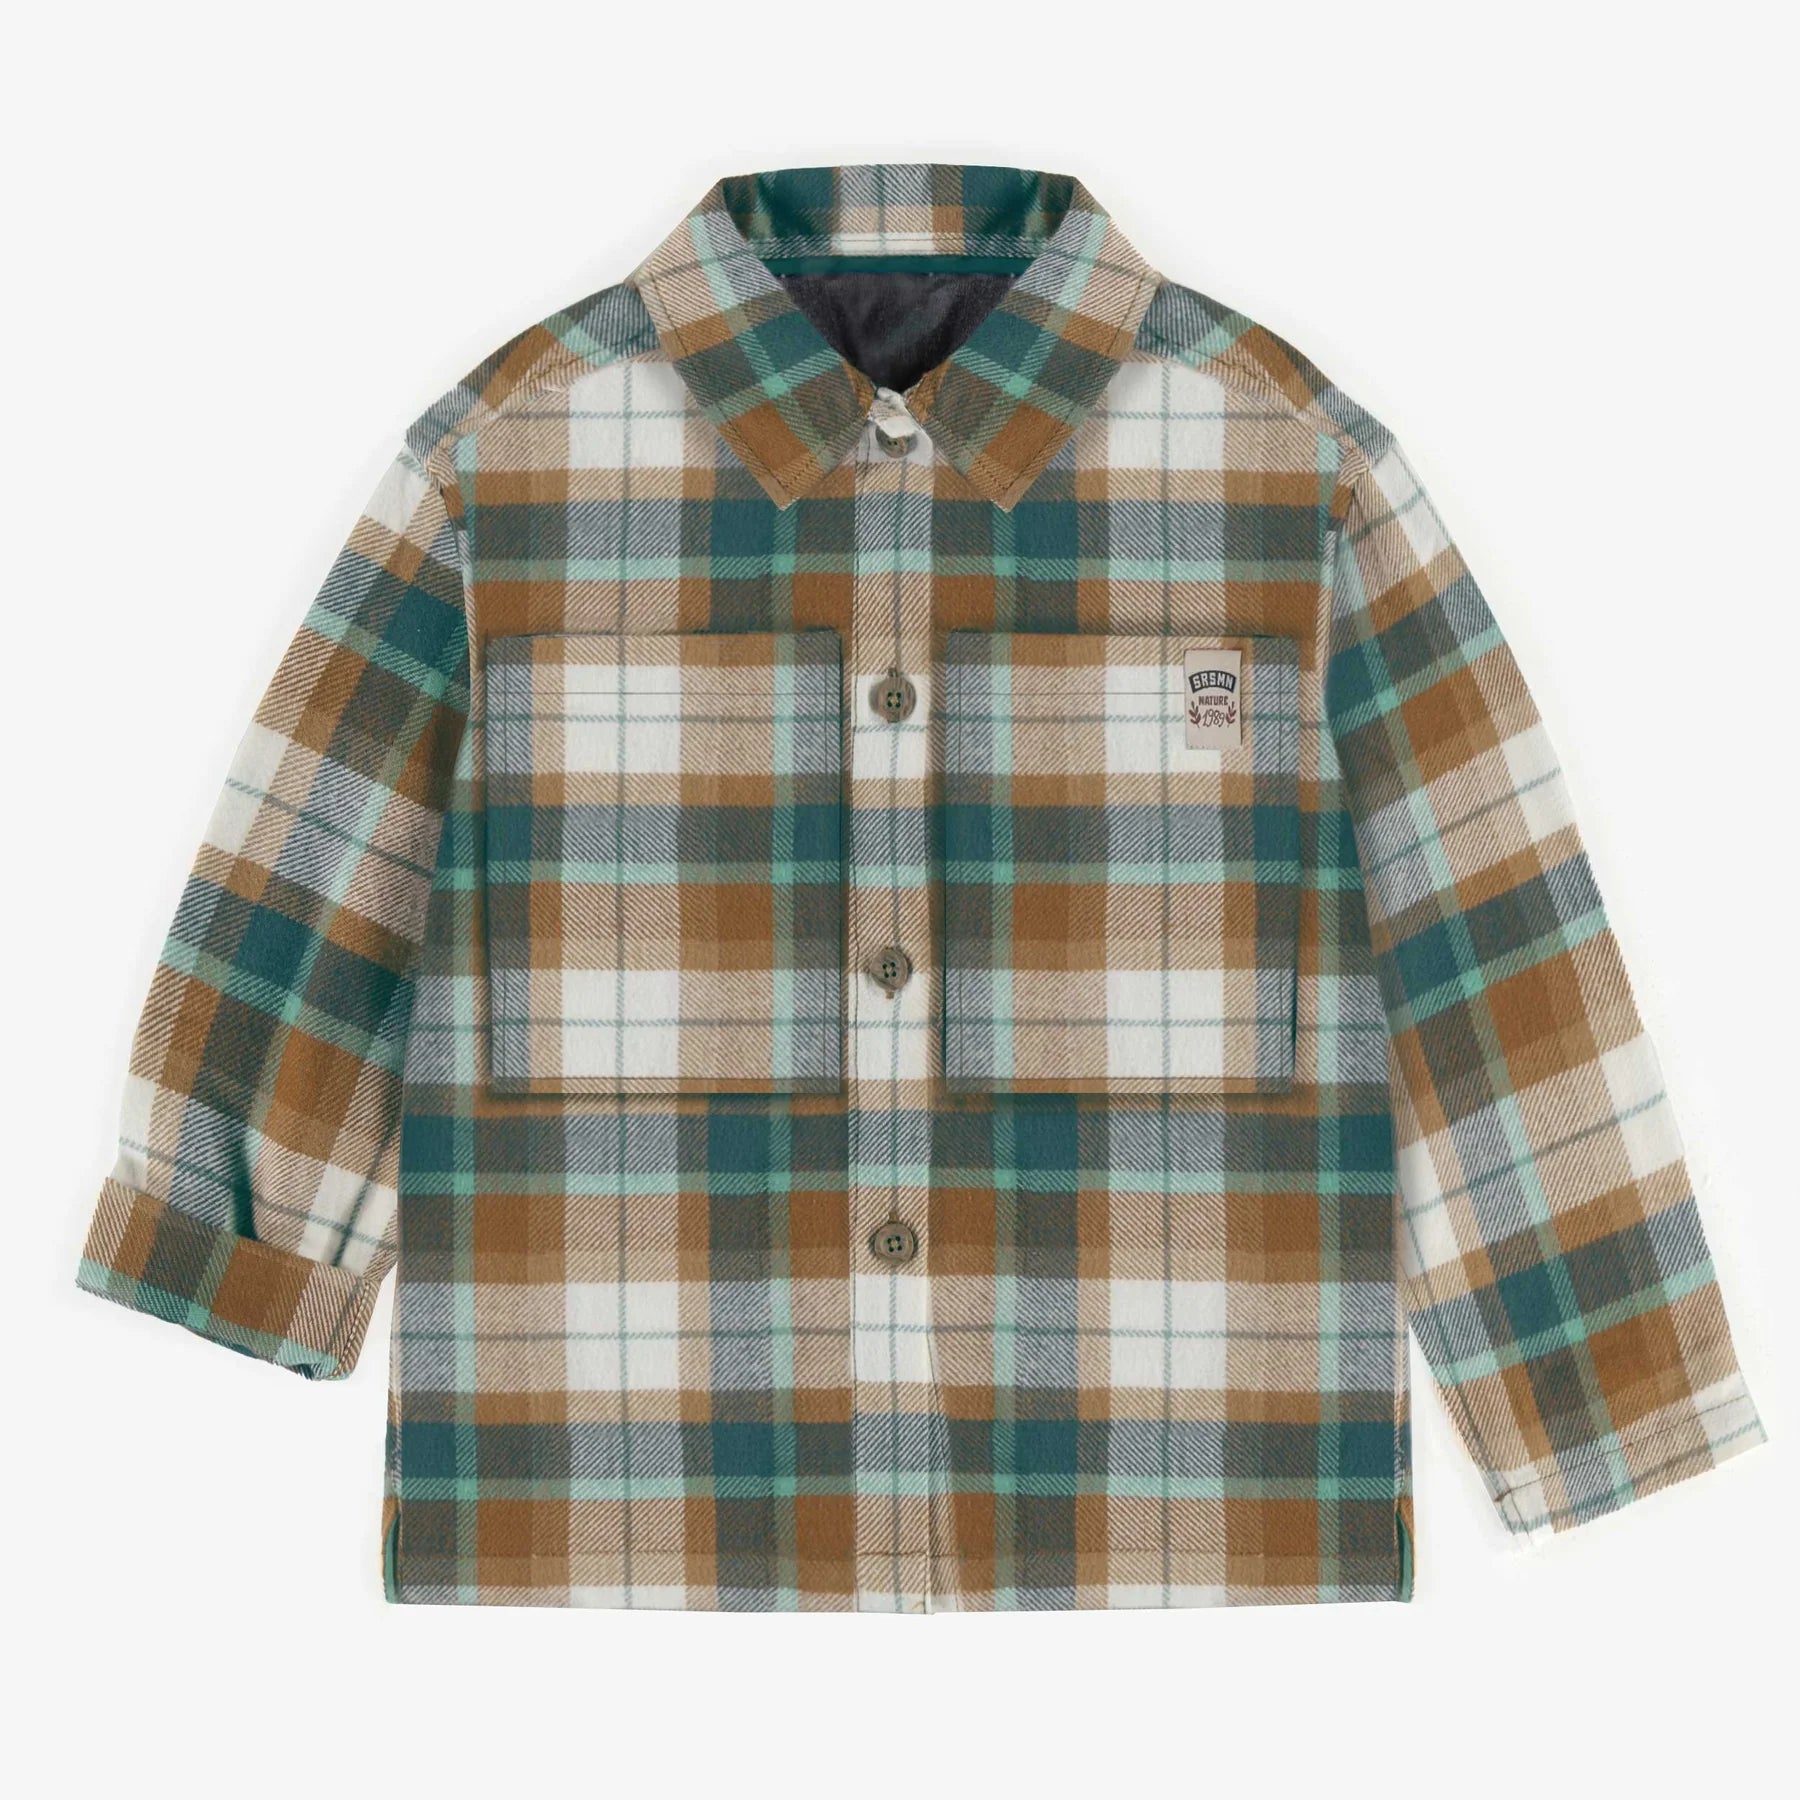 GREEN AND BROWN PLAID SHIRT IN FLANNEL